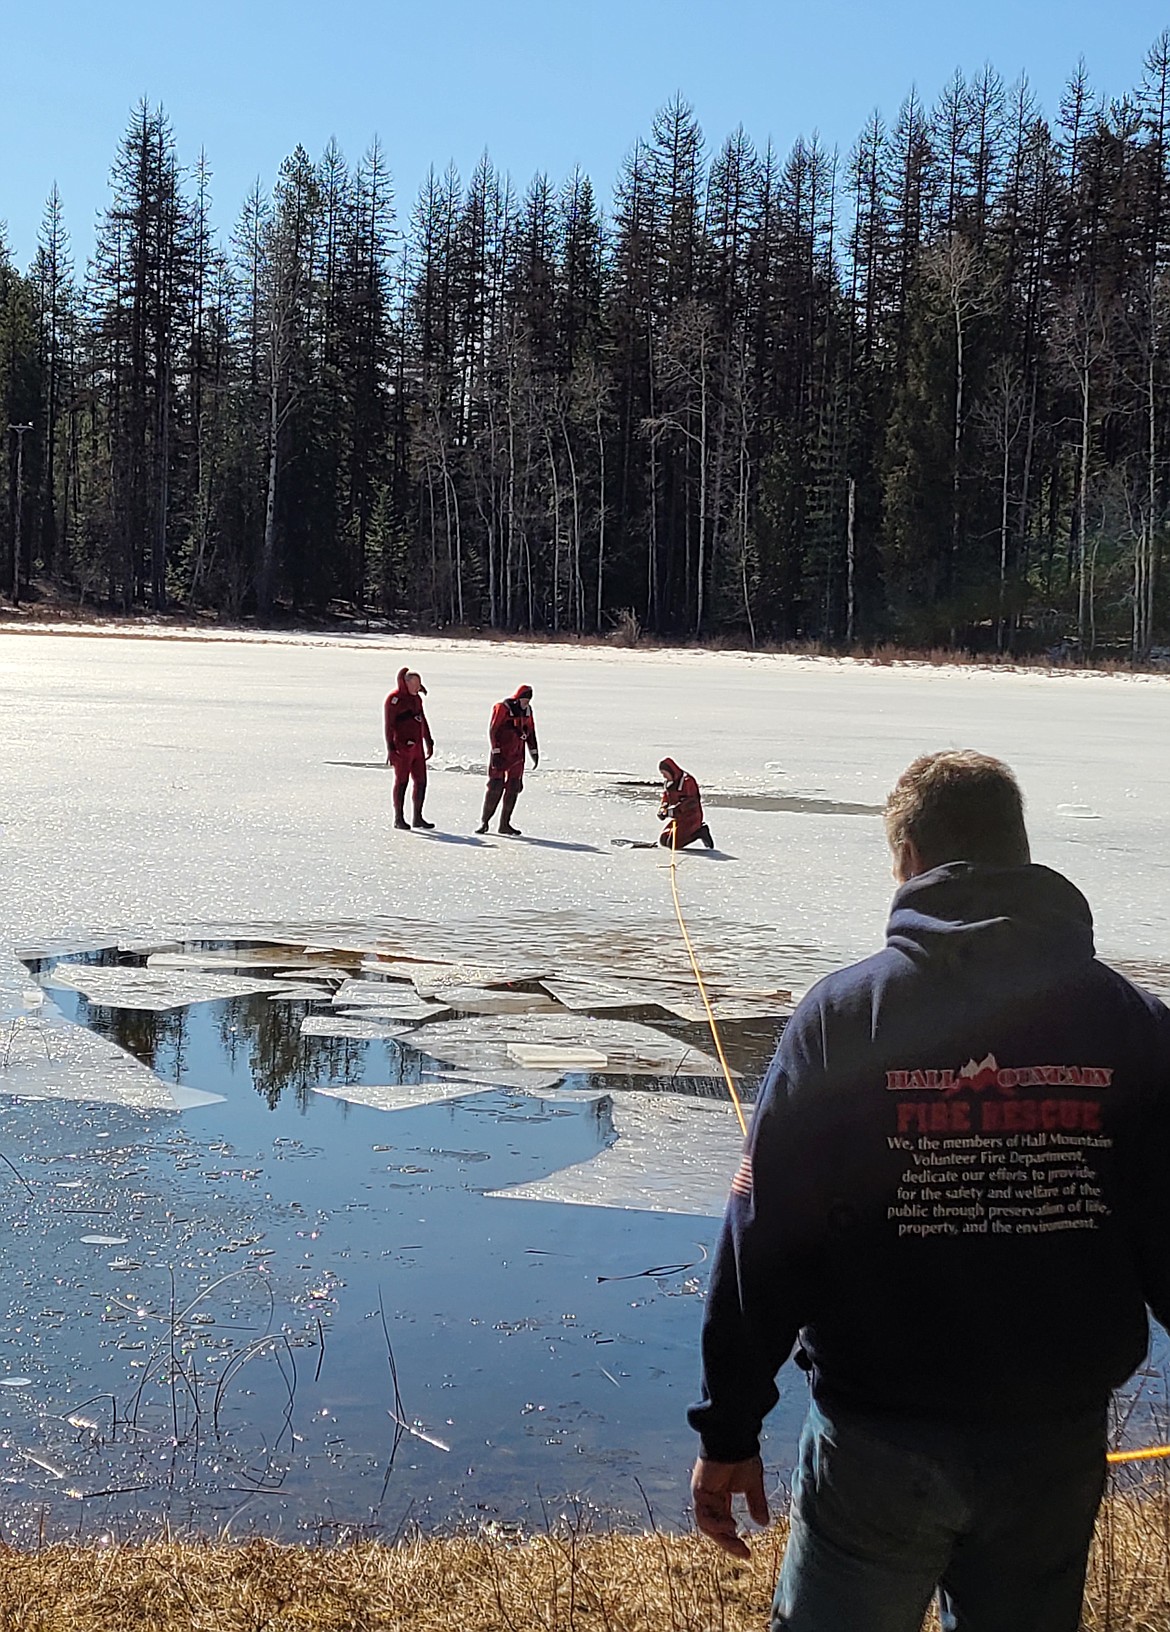 The rotten ice is unsafe, making it a perfect place for the firefighters to train.